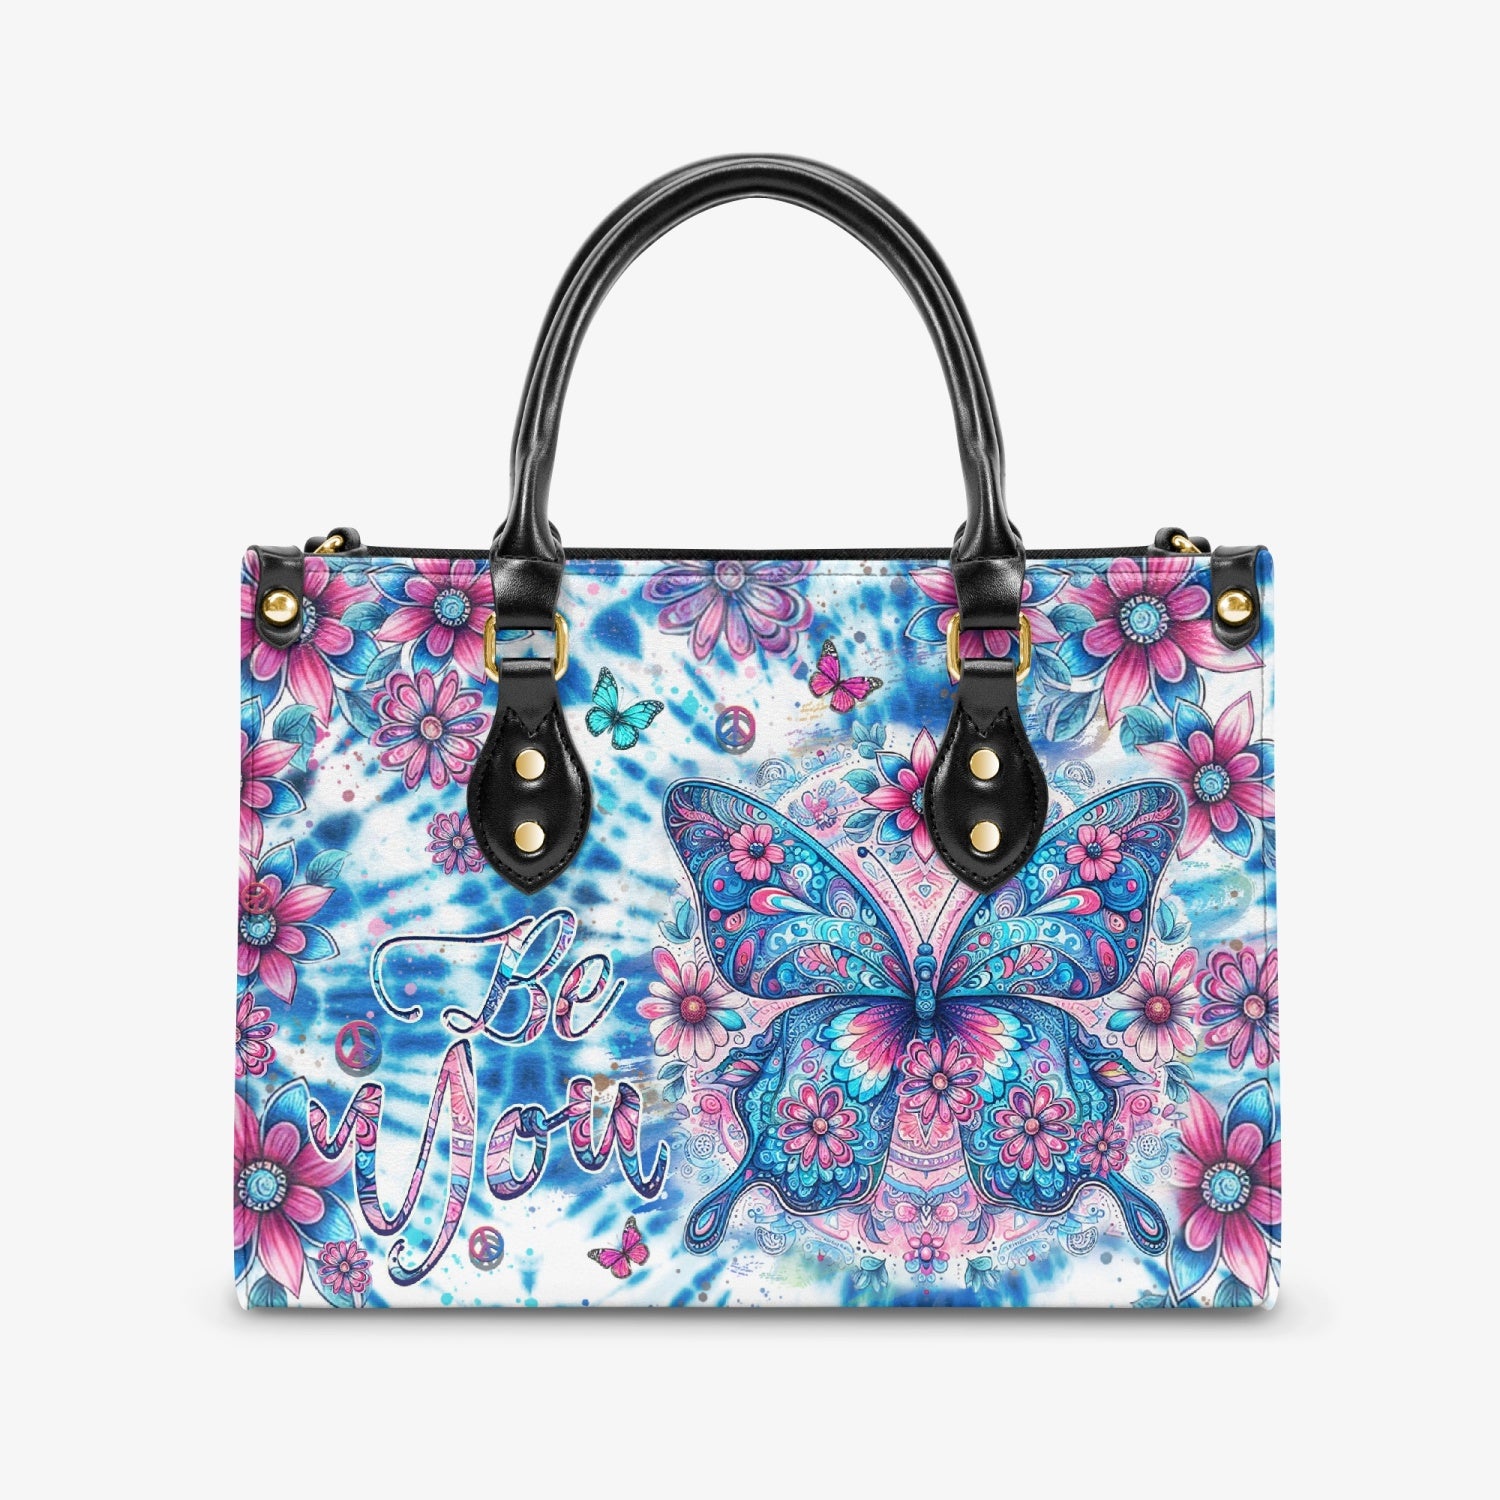 BE YOU BUTTERFLY LEATHER HANDBAG - YHHN2603241